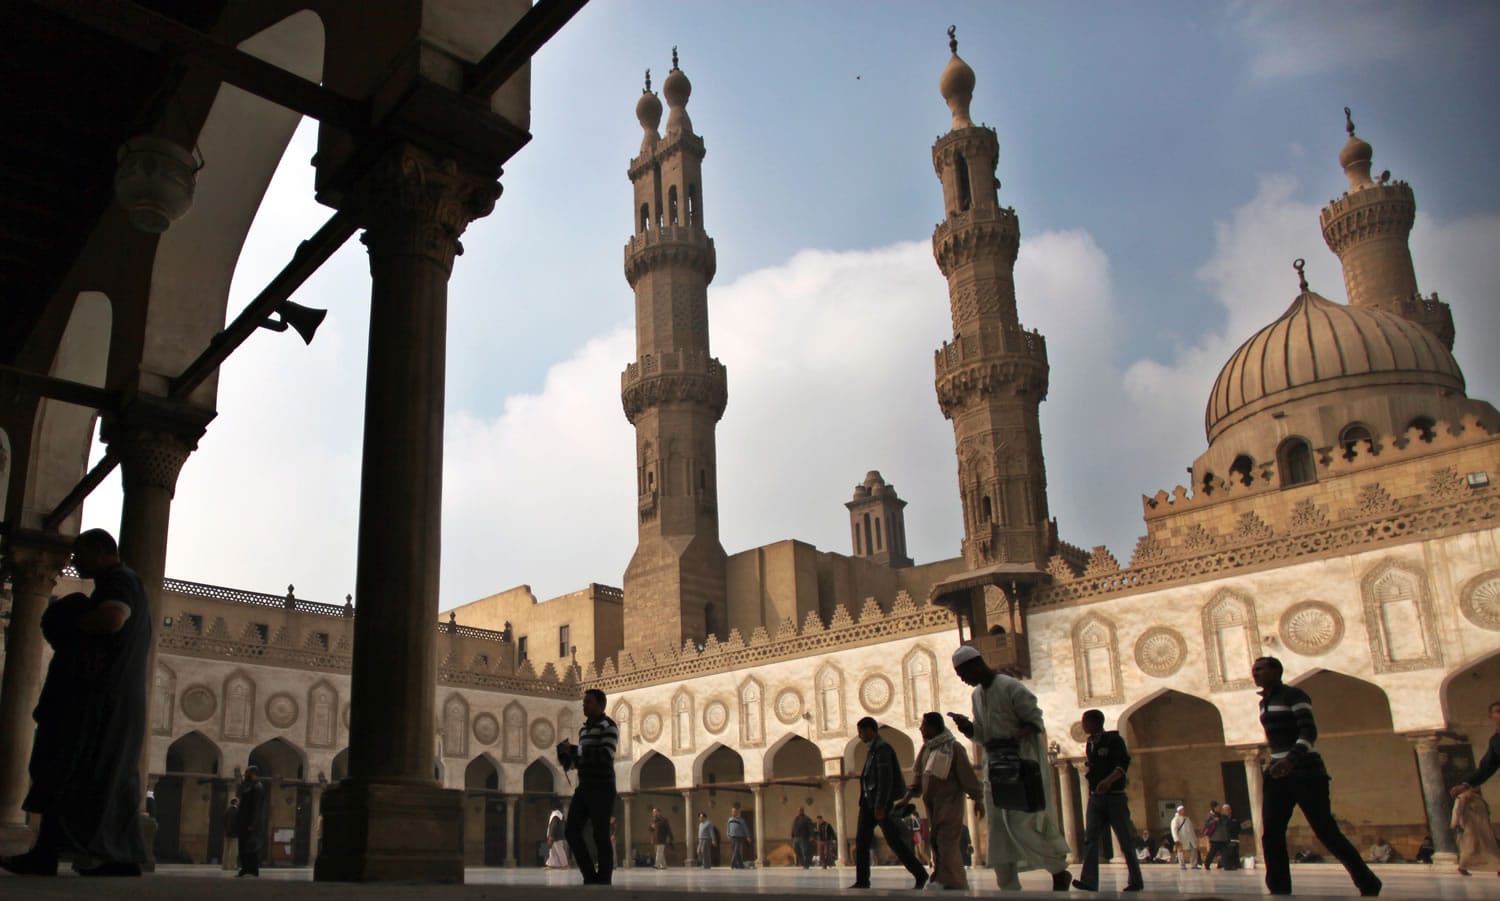 Muslims arrive to attend Friday prayer Dec. 28, 2012, at Al-Azhar mosque in Cairo, Egypt.